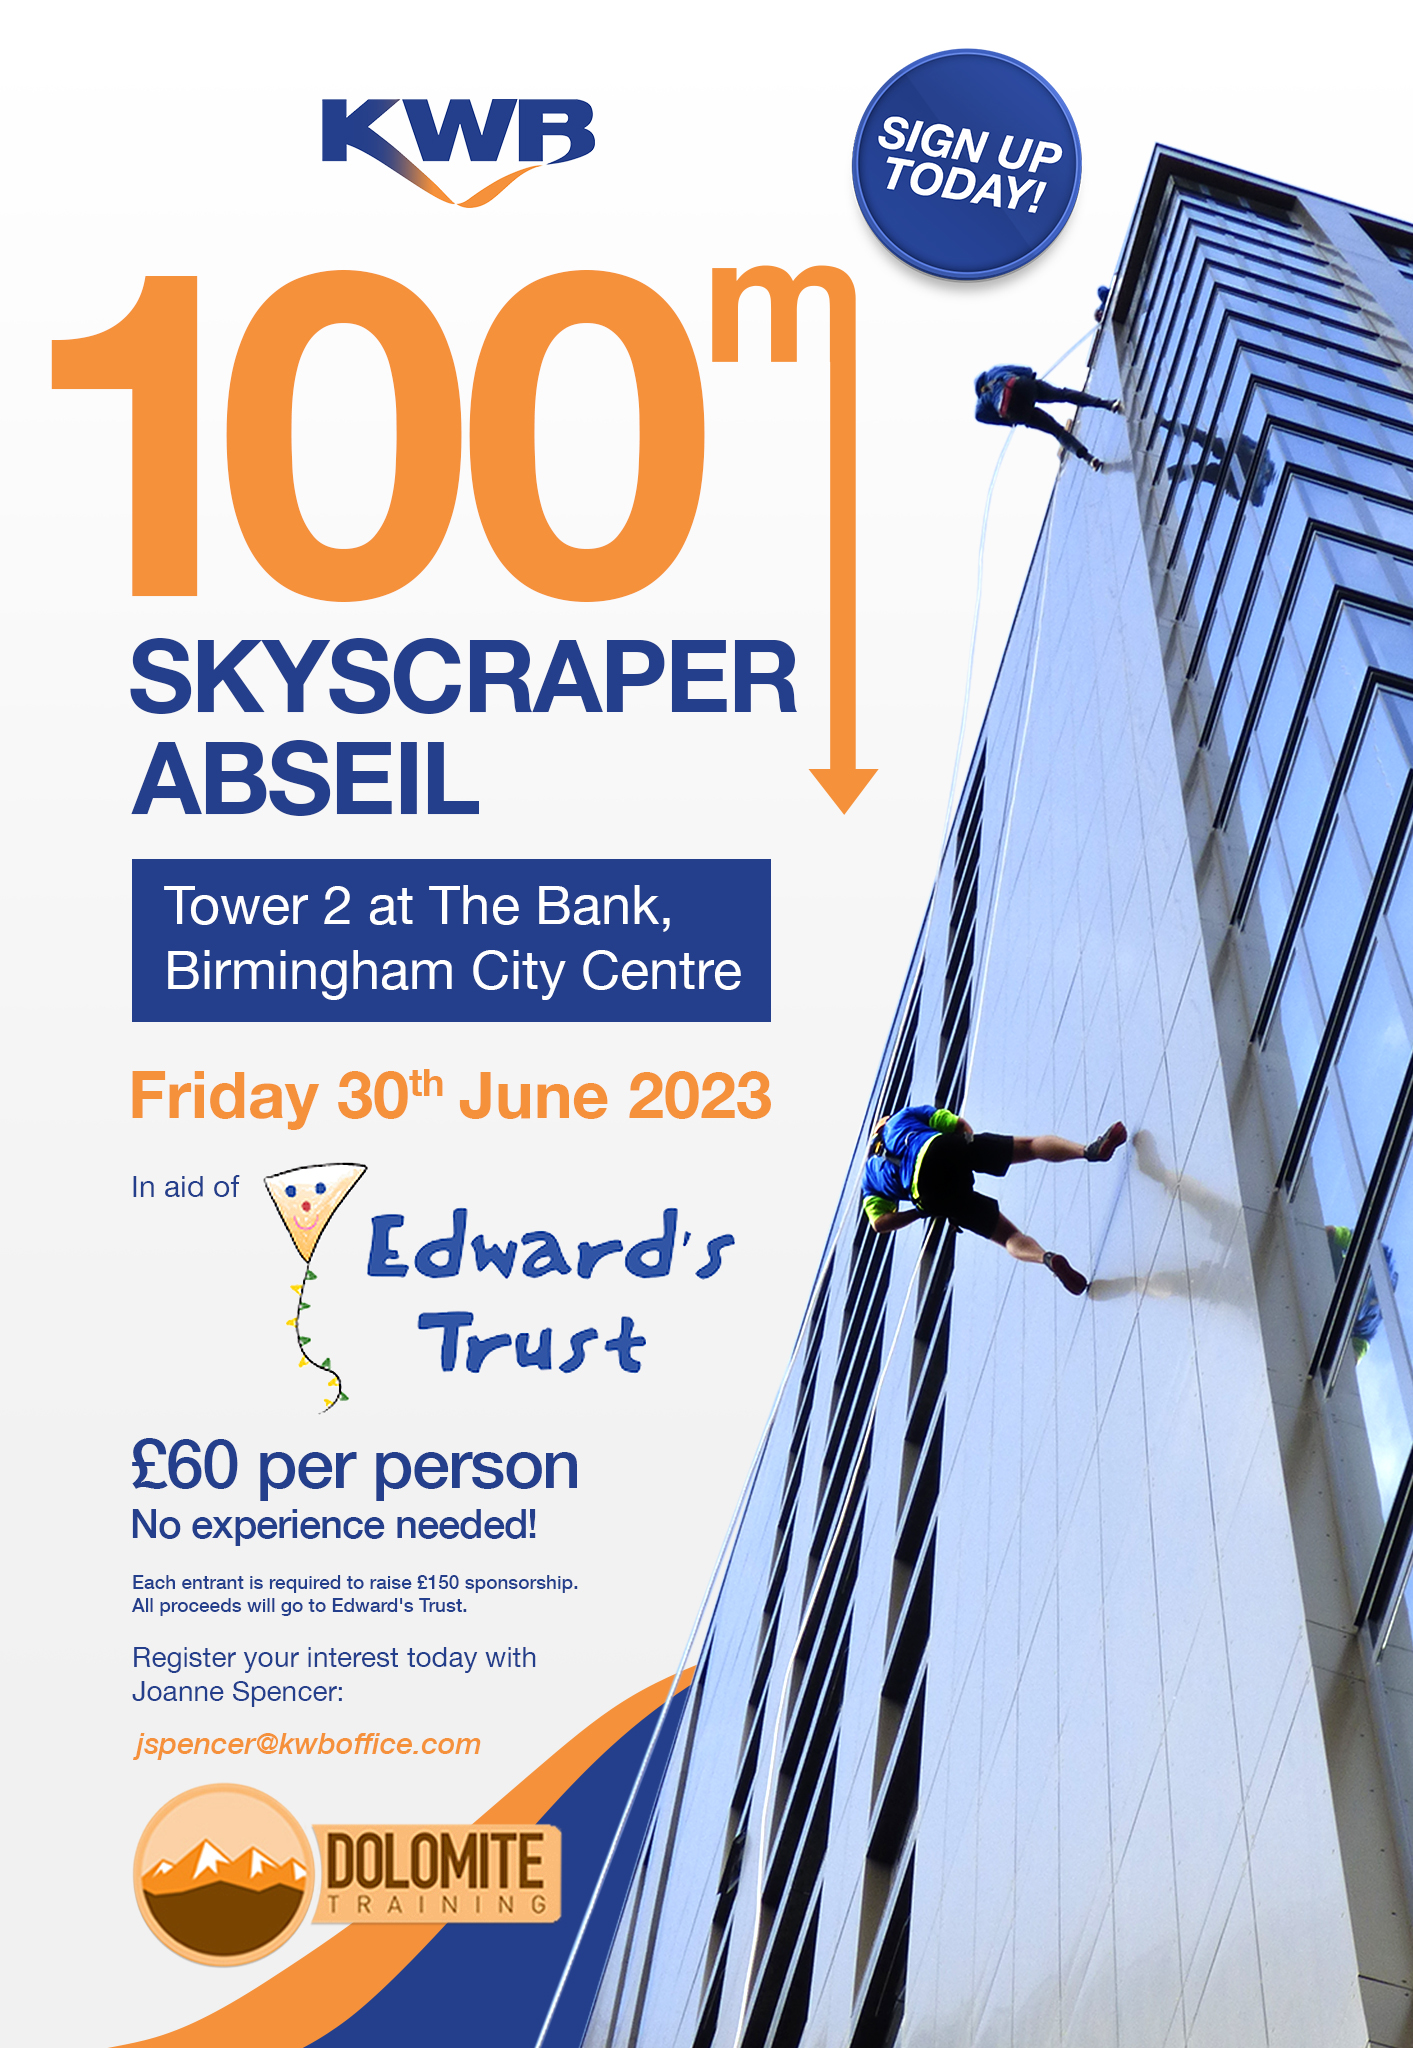 KWB charity abseil returns on Friday 30th June 2023 at The Bank, Birmingham city centre